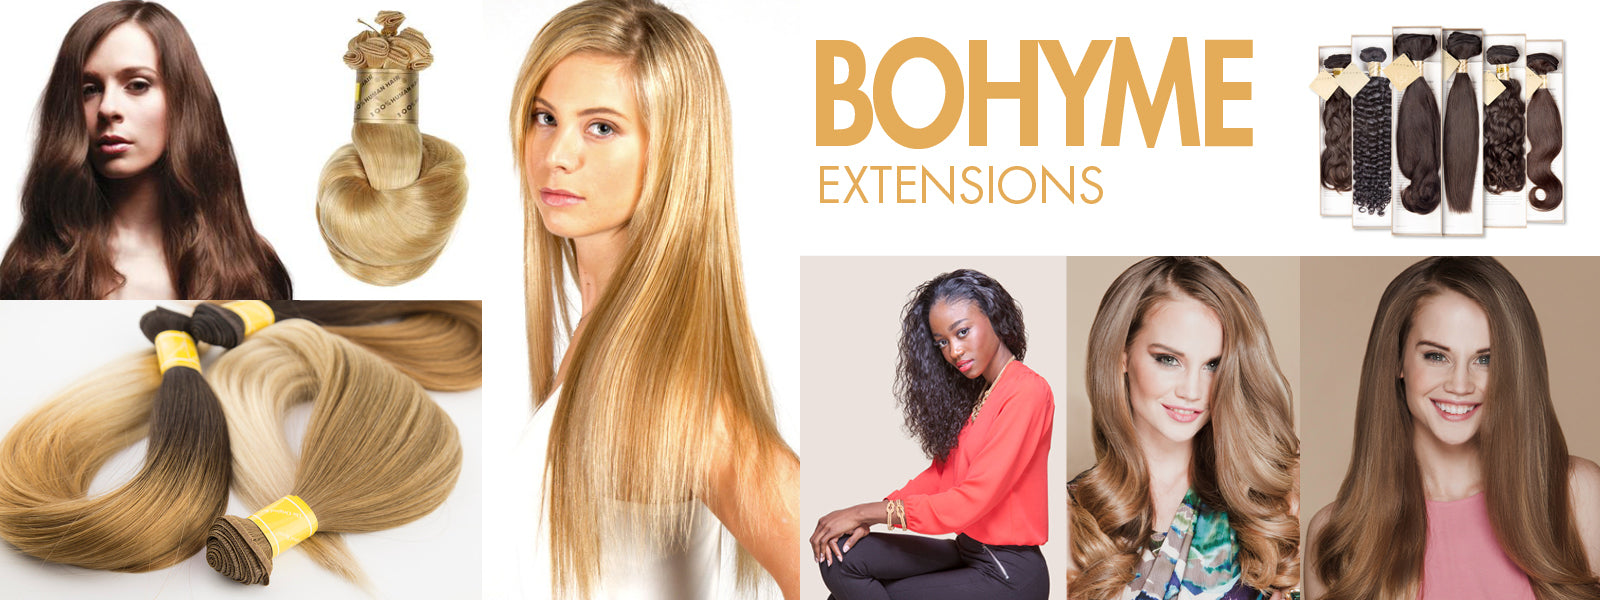 Bohyme Extensions available at Abantu